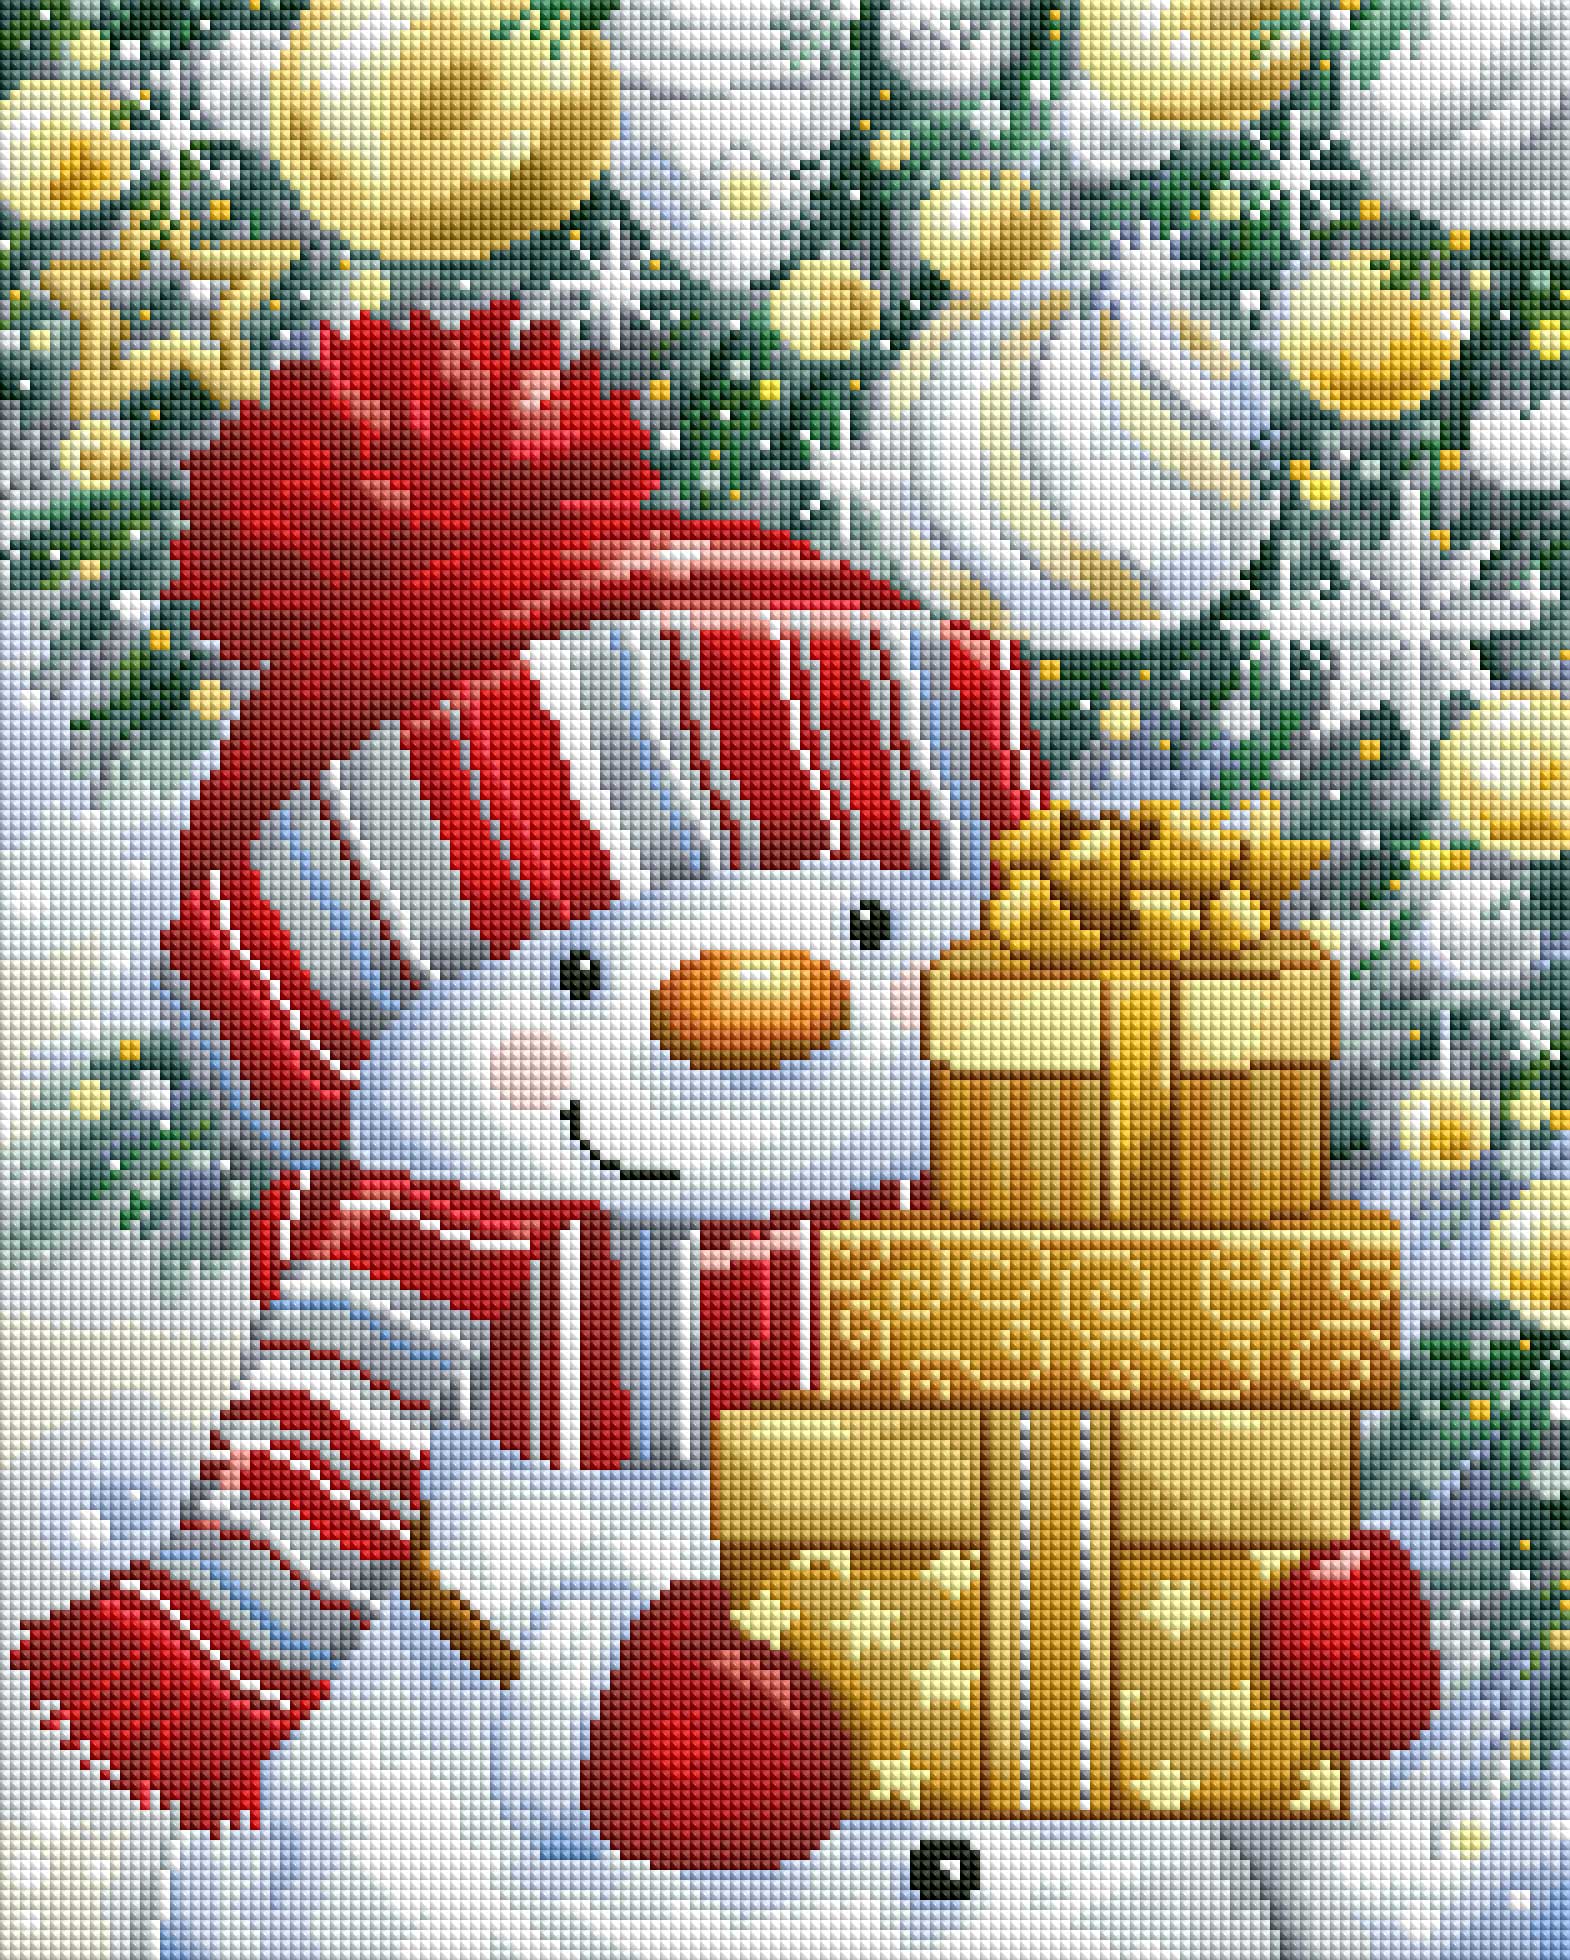 Snowman with Gold and Silver Presents